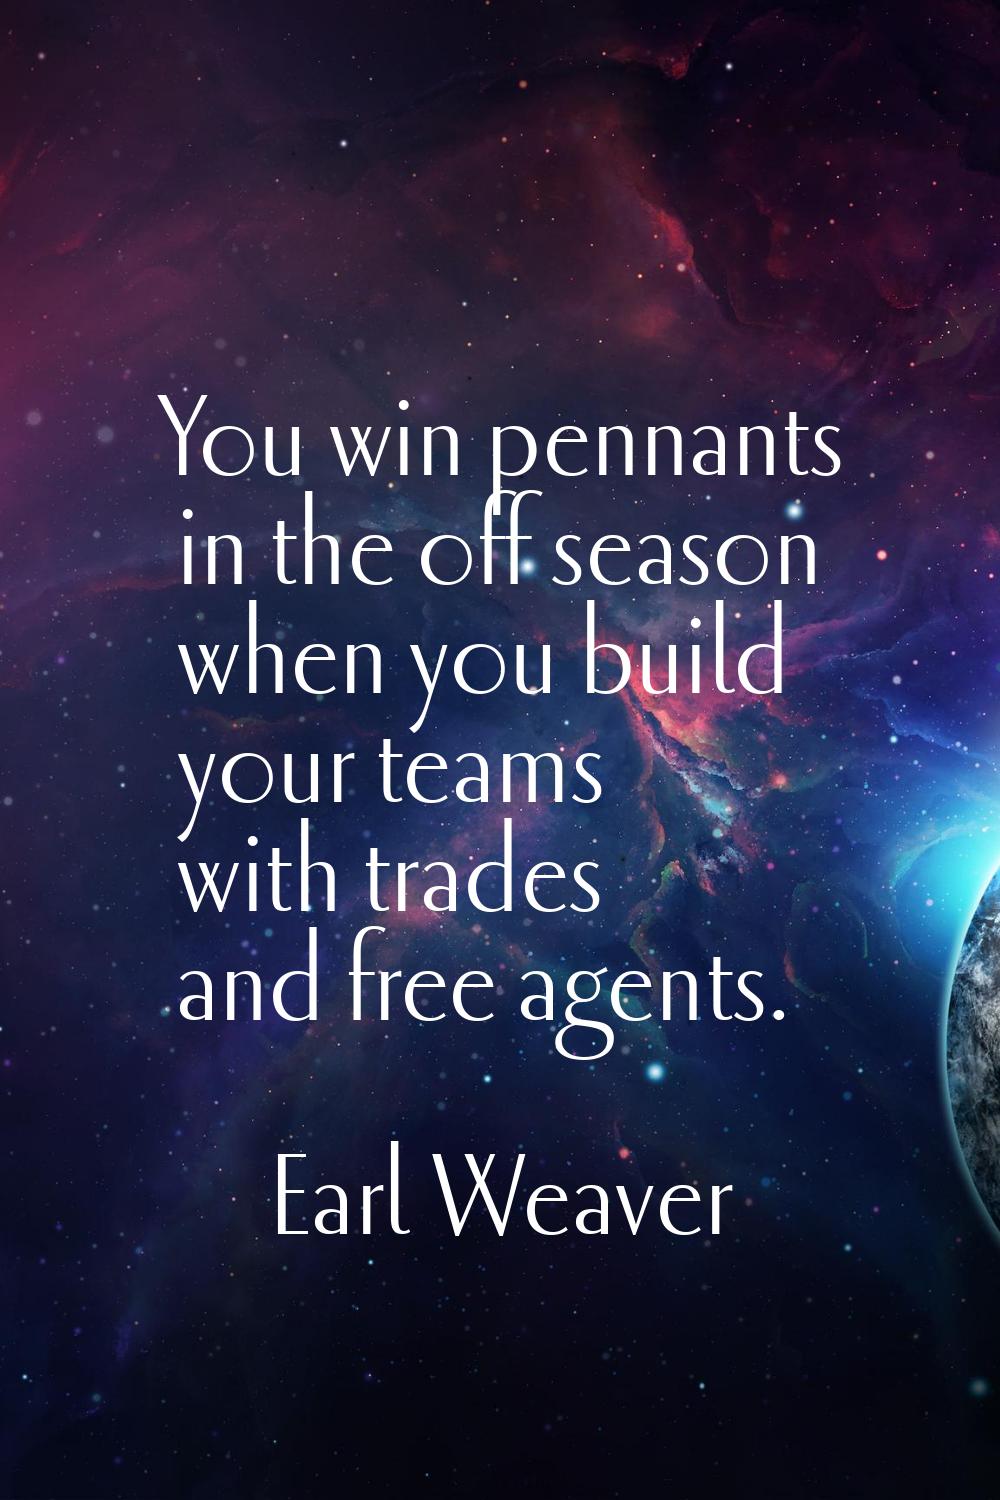 You win pennants in the off season when you build your teams with trades and free agents.